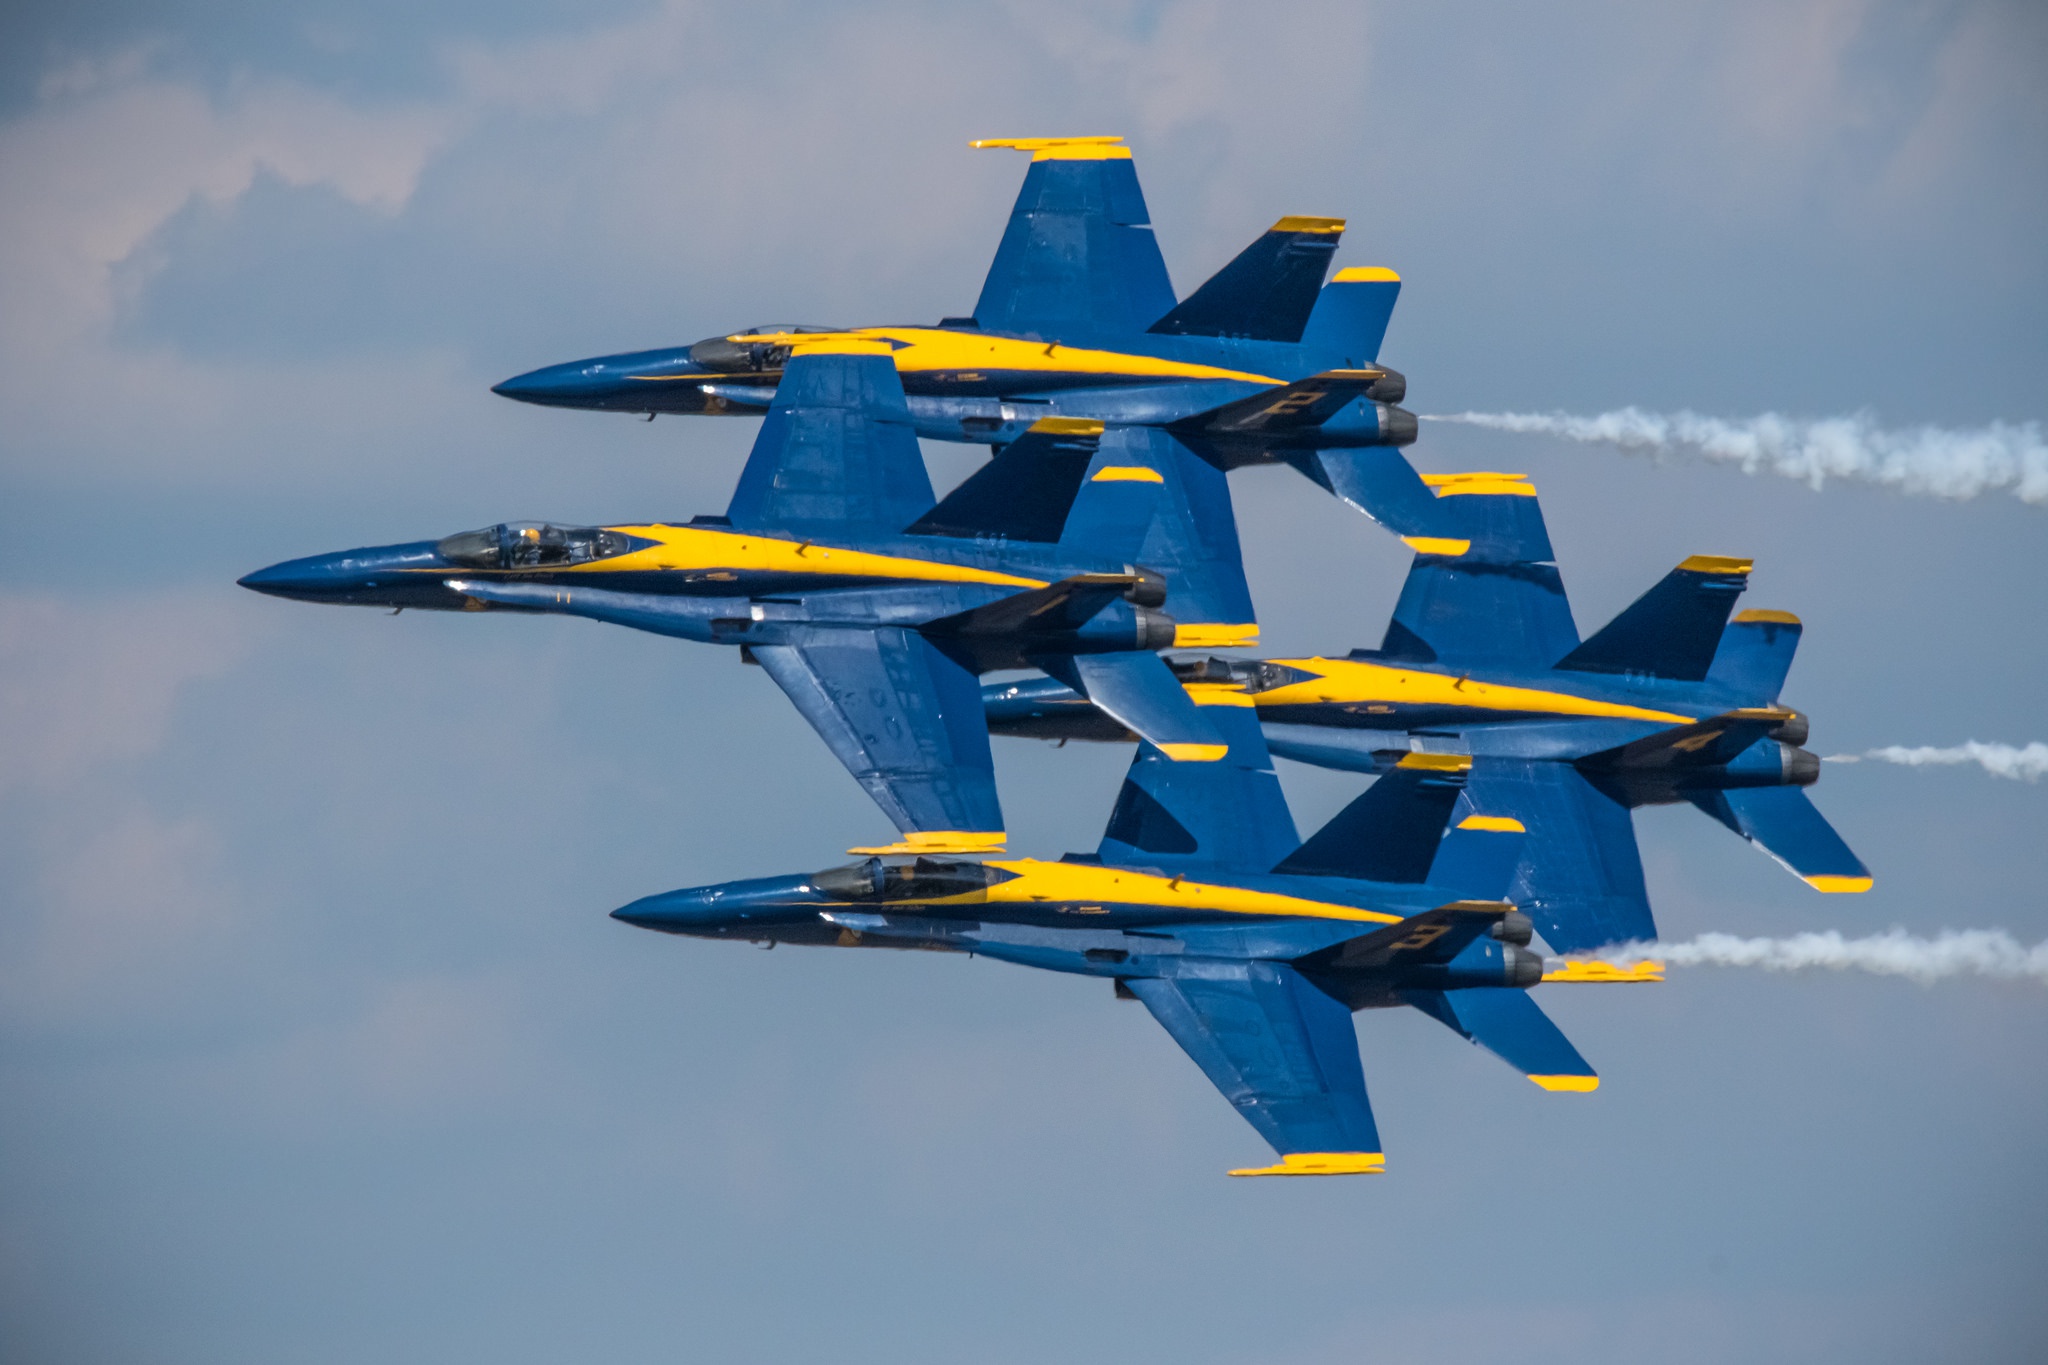 military, air show, aircraft, blue angels, jet fighter, military aircraft